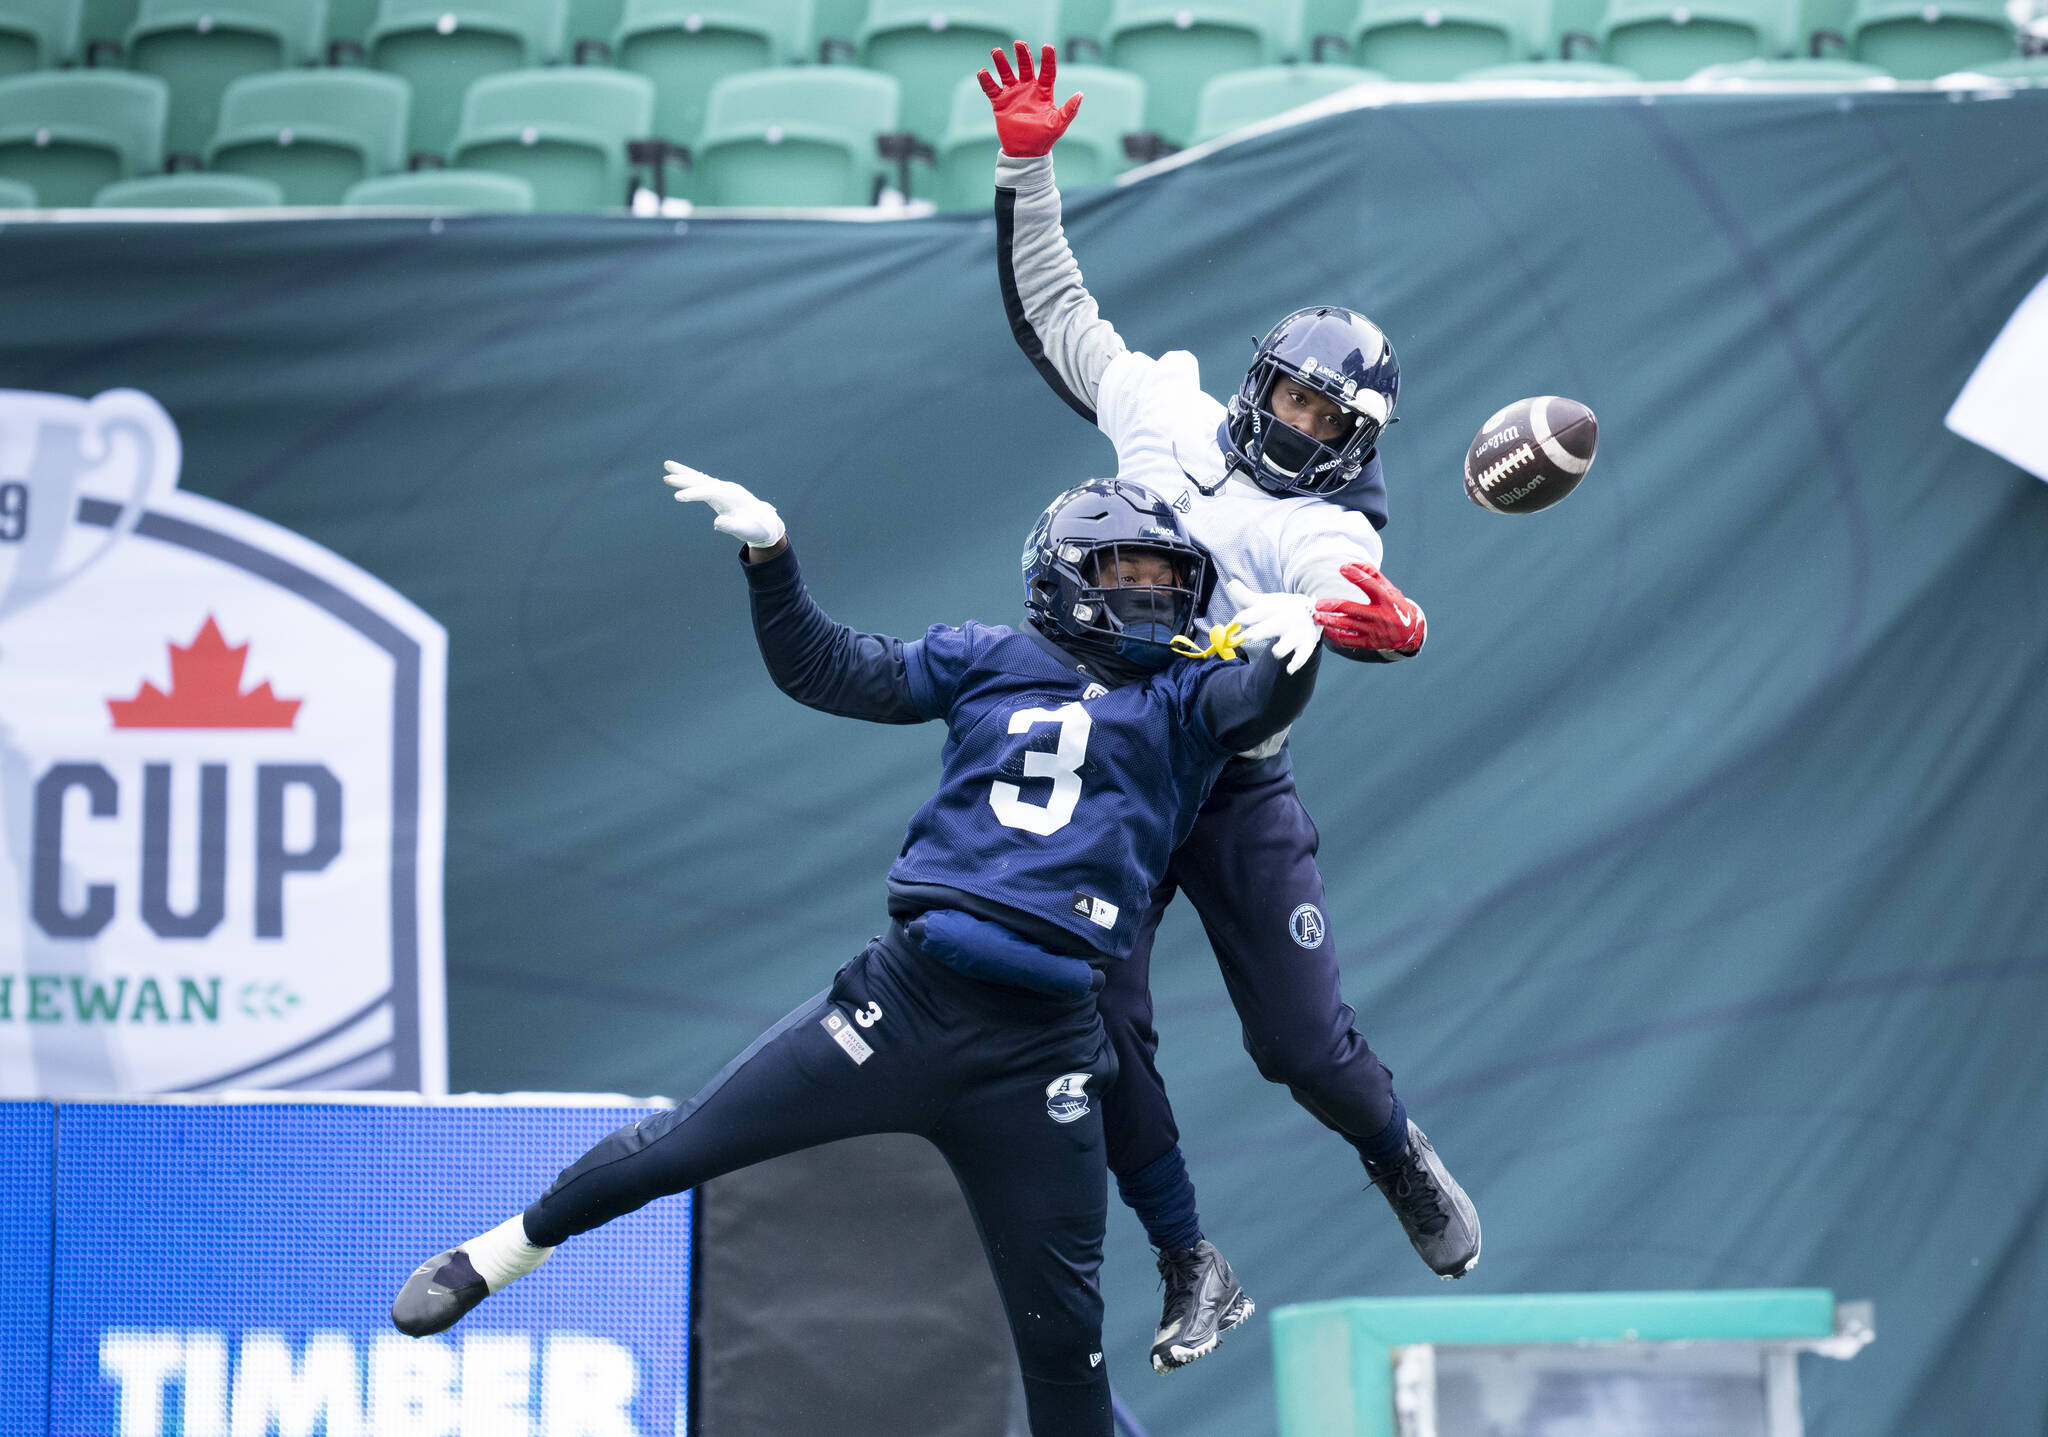 Toronto Argonauts defensive back Jamal Peters breaks up a pass intended for wide receiver Dejon Brissett during a practice in Regina, Friday, Nov. 18, 2022. The Toronto Argonauts will be playing against the Winnipeg Blue Bombers in the 109th Grey Cup on Sunday. THE CANADIAN PRESS/Paul Chiasson